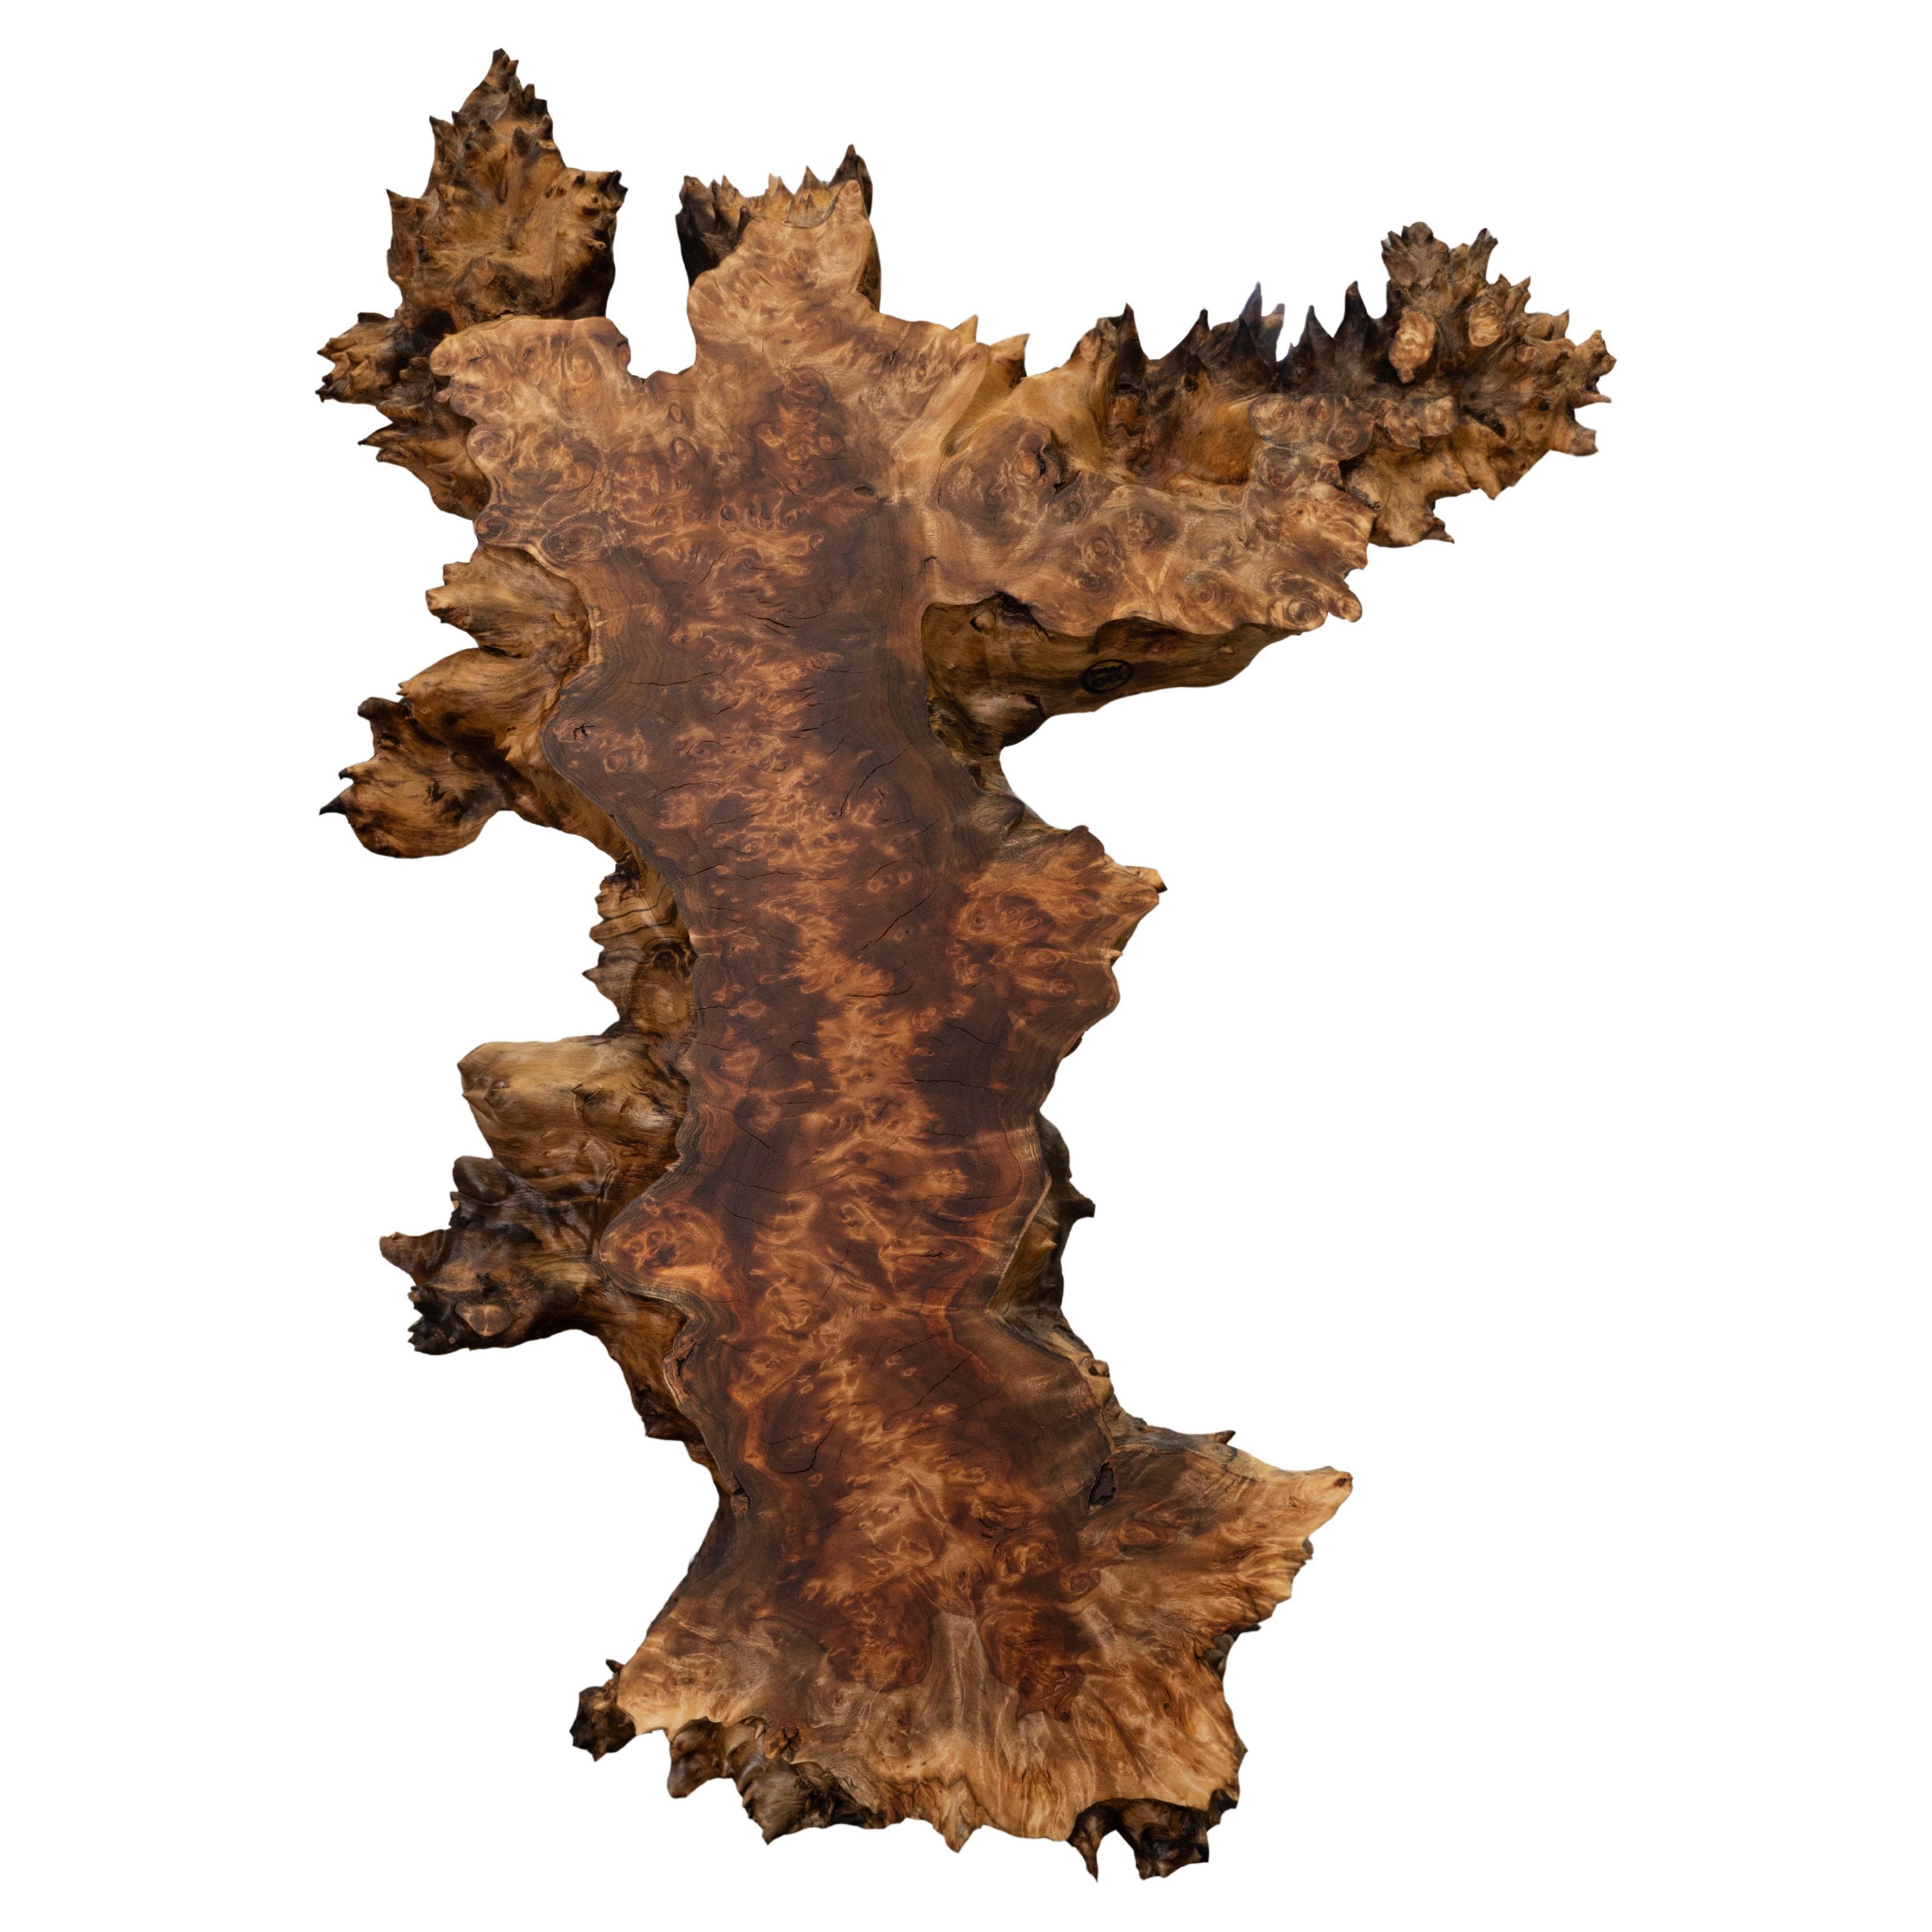 The form of this stunning & rare cottonwood burl is breathtaking. Its unusual form, and spikey edges made it clear that this piece's only future was through admiration as wall art. 

The more you look, the more you see this stunner. 

This piece can